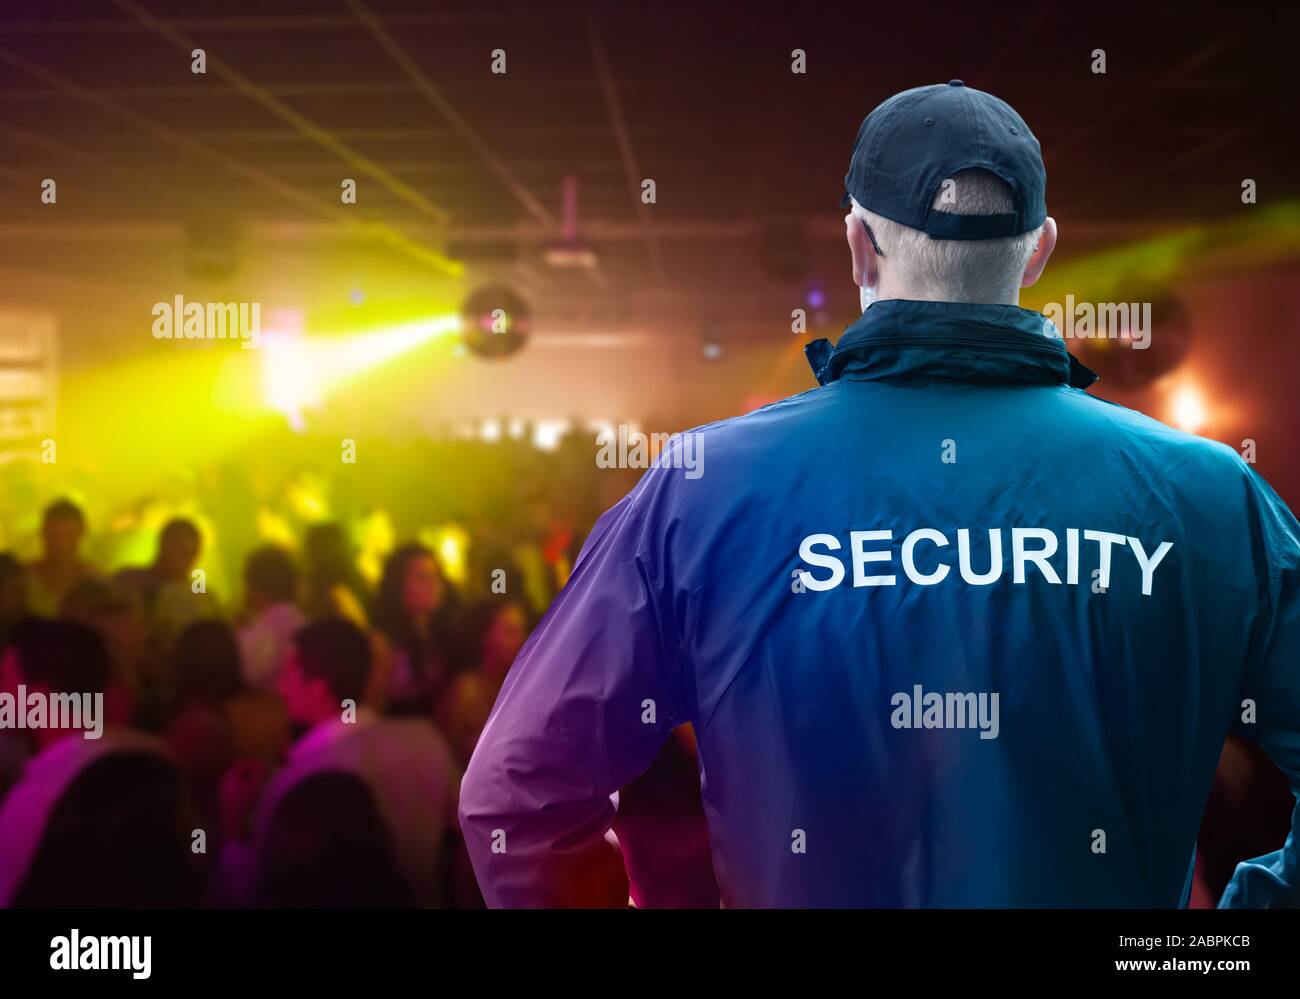 Male Security Officer Wearing Cap Standing In Night Club With His Hands On Hips Stock Photo